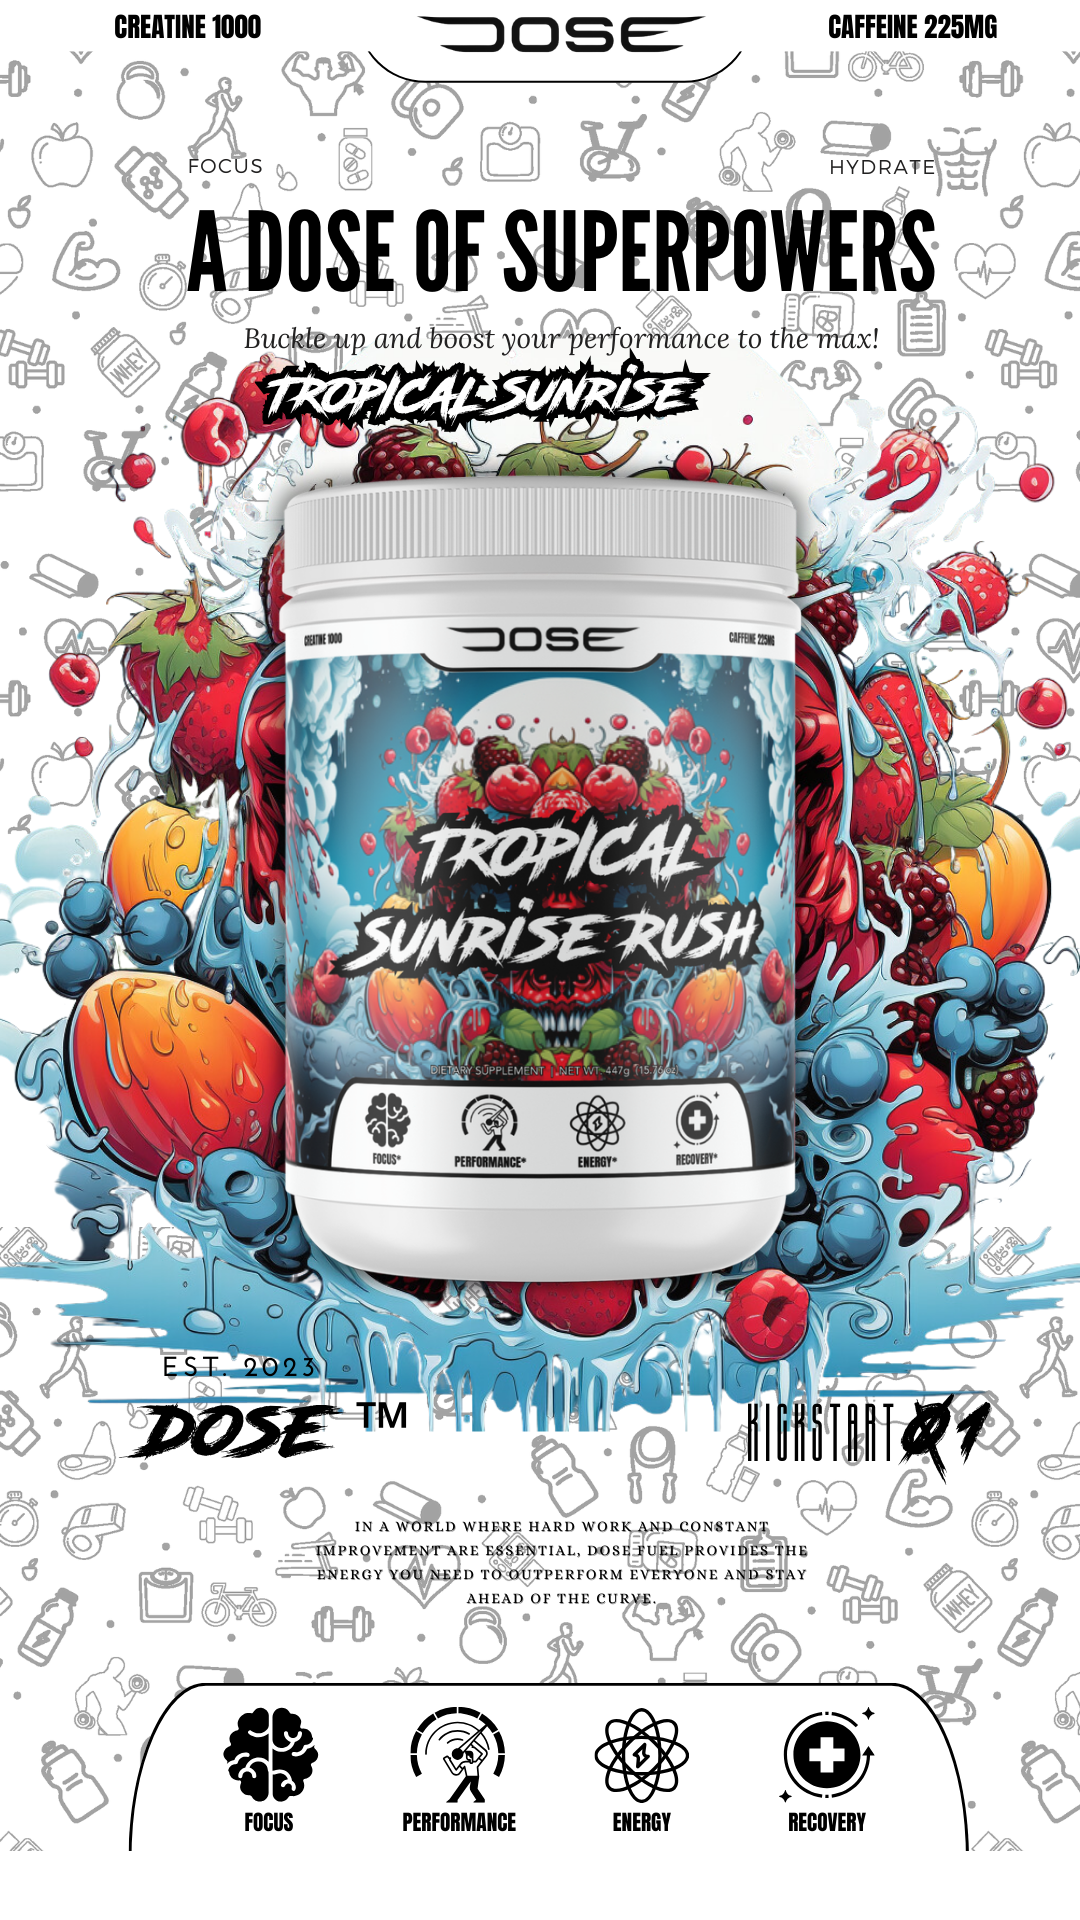 Dose Fuel Tropical Sunrise Rush Pre-Workout Supplement - A Dose of Superpowers, 1000mg Creatine, 225mg Caffeine, Boost Performance, Focus, Energy, and Recovery